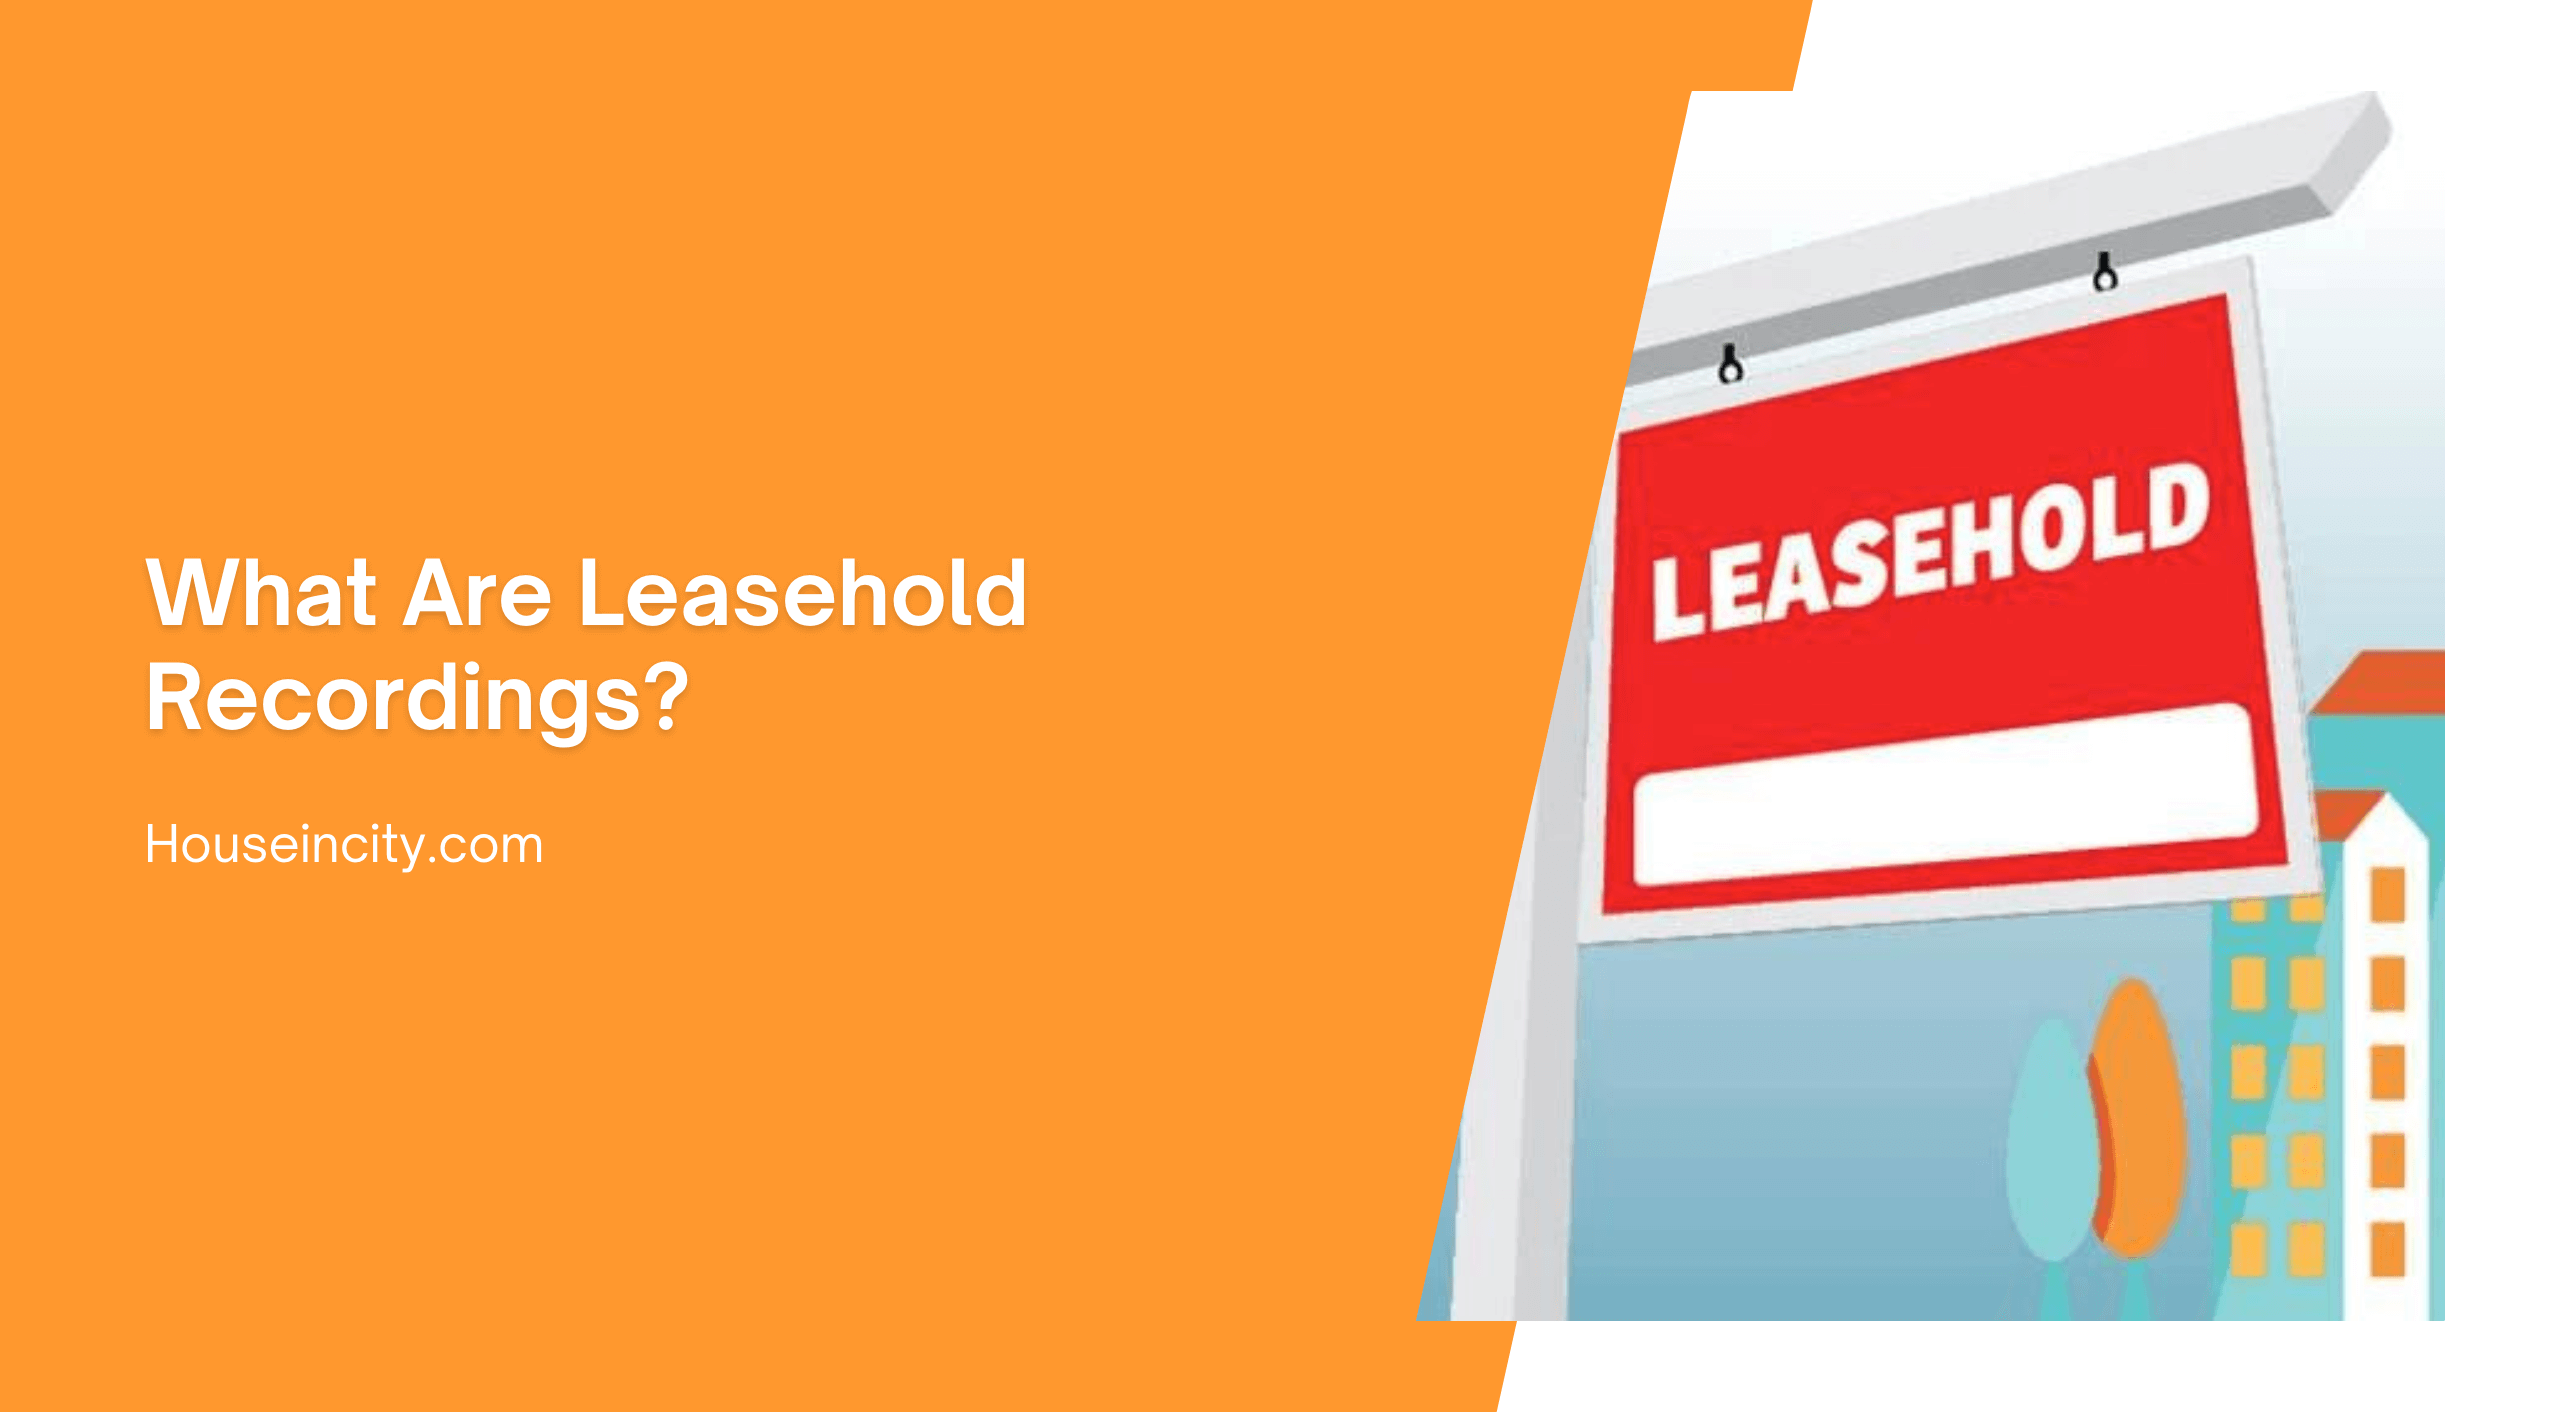 What Are Leasehold Recordings?